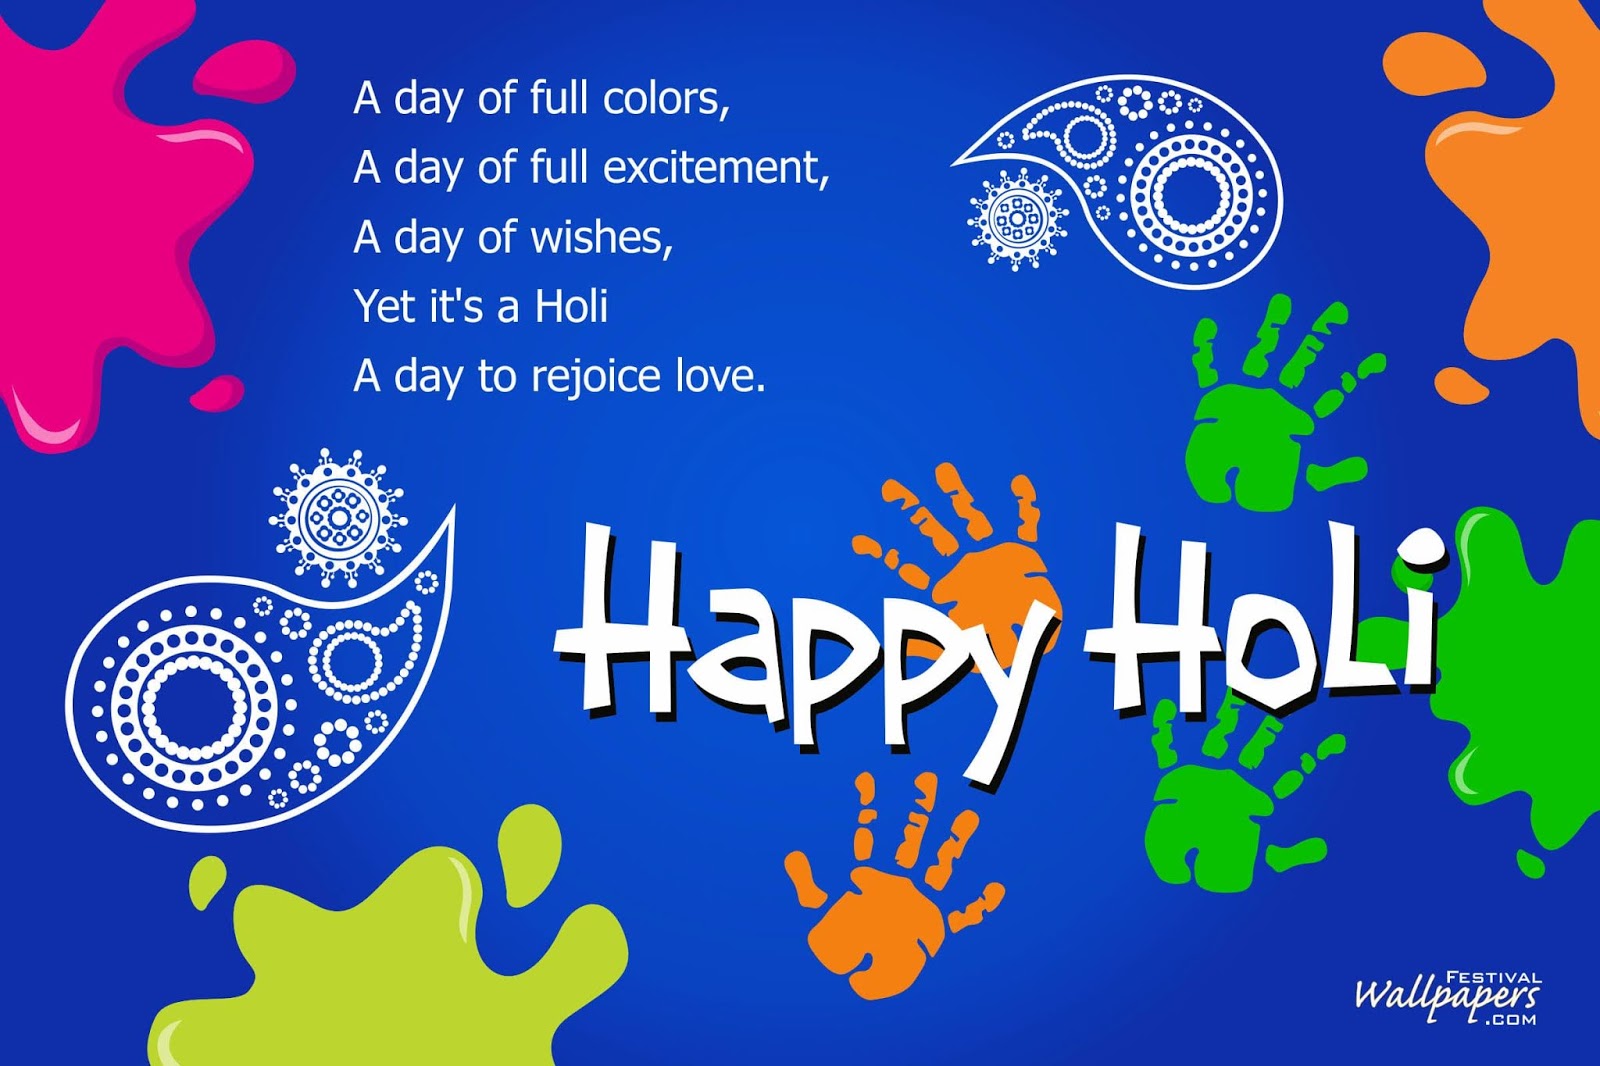 10 Best Happy Holi Wishes Images And Wallpapers For - Graphic Design -  1600x1066 Wallpaper 